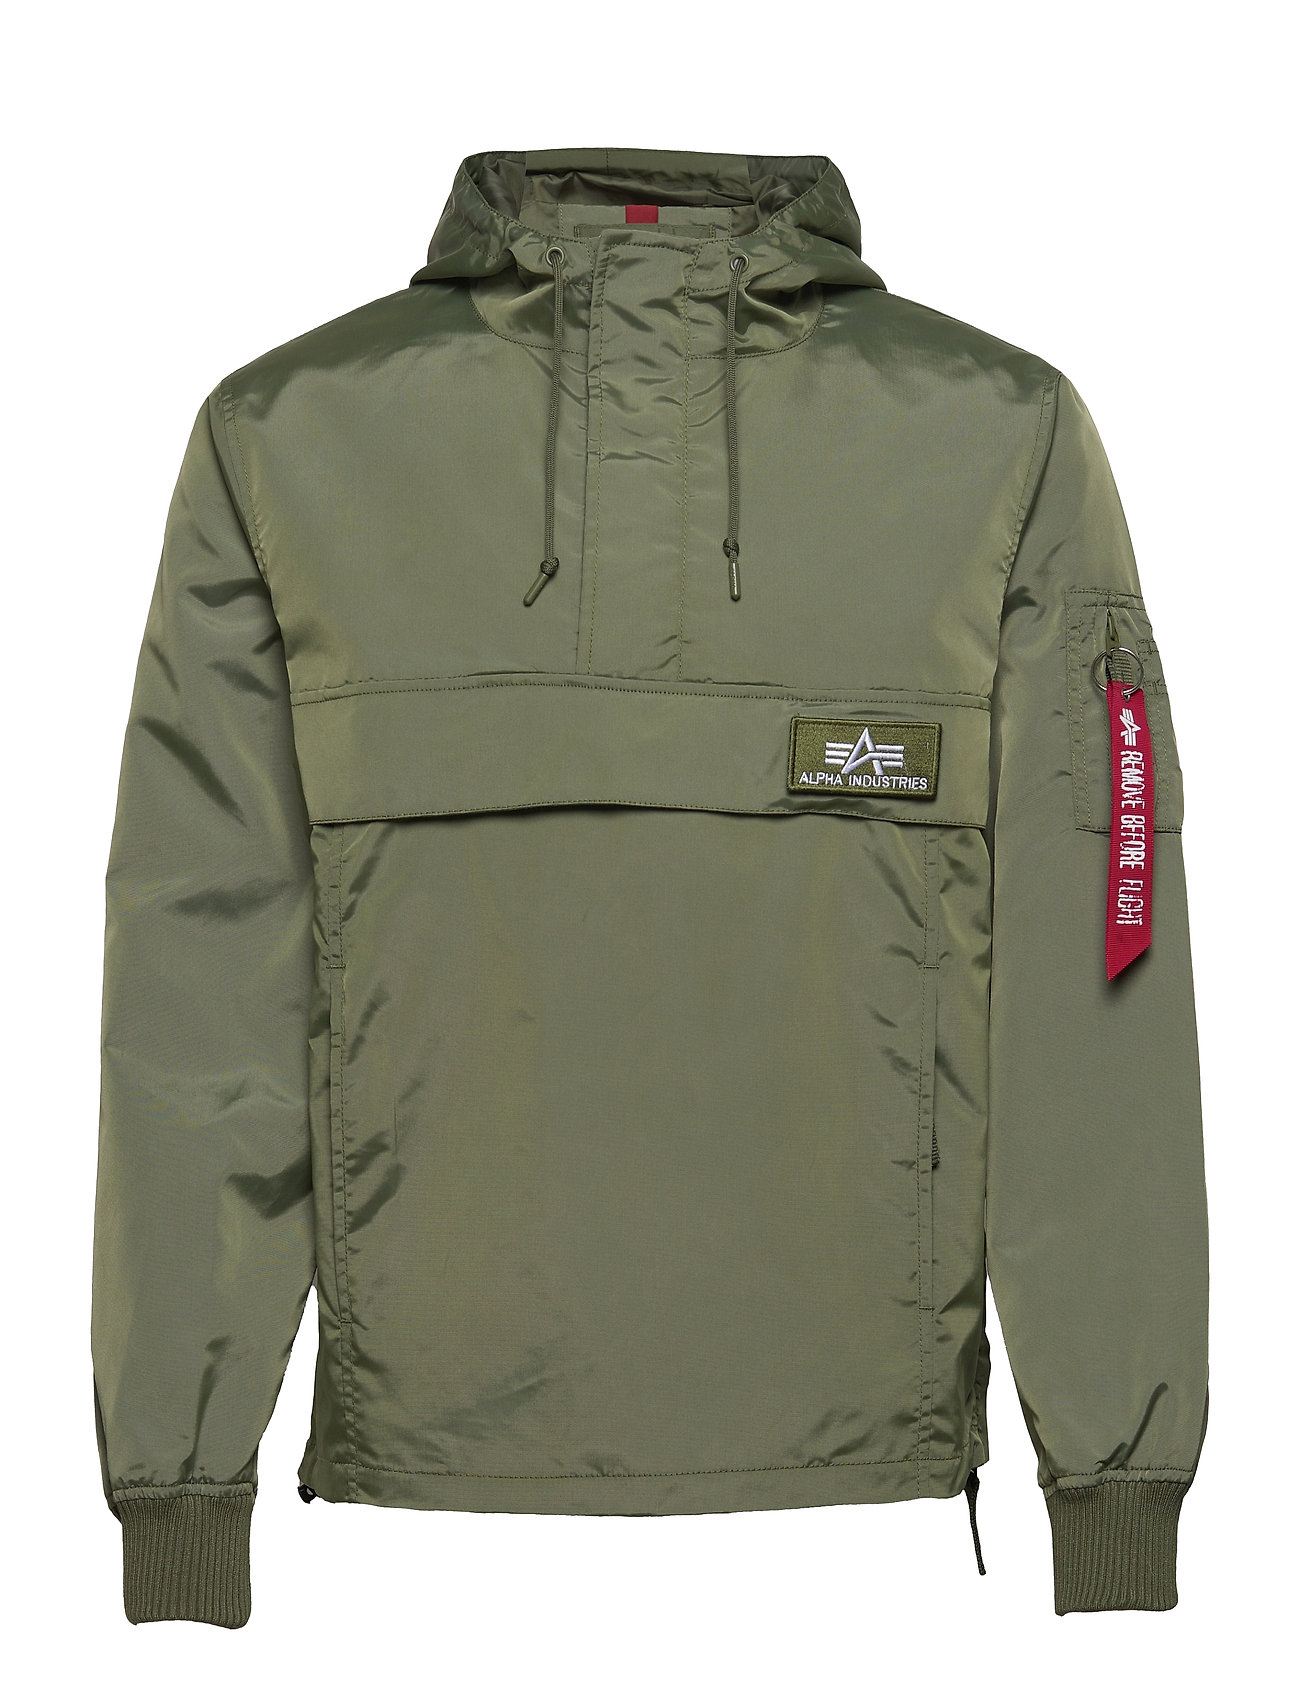 Alpha Industries Tt Anorak Fast - online from Buy easy Boozt.com. Industries Alpha 140 delivery returns Lw at €. and Anorak